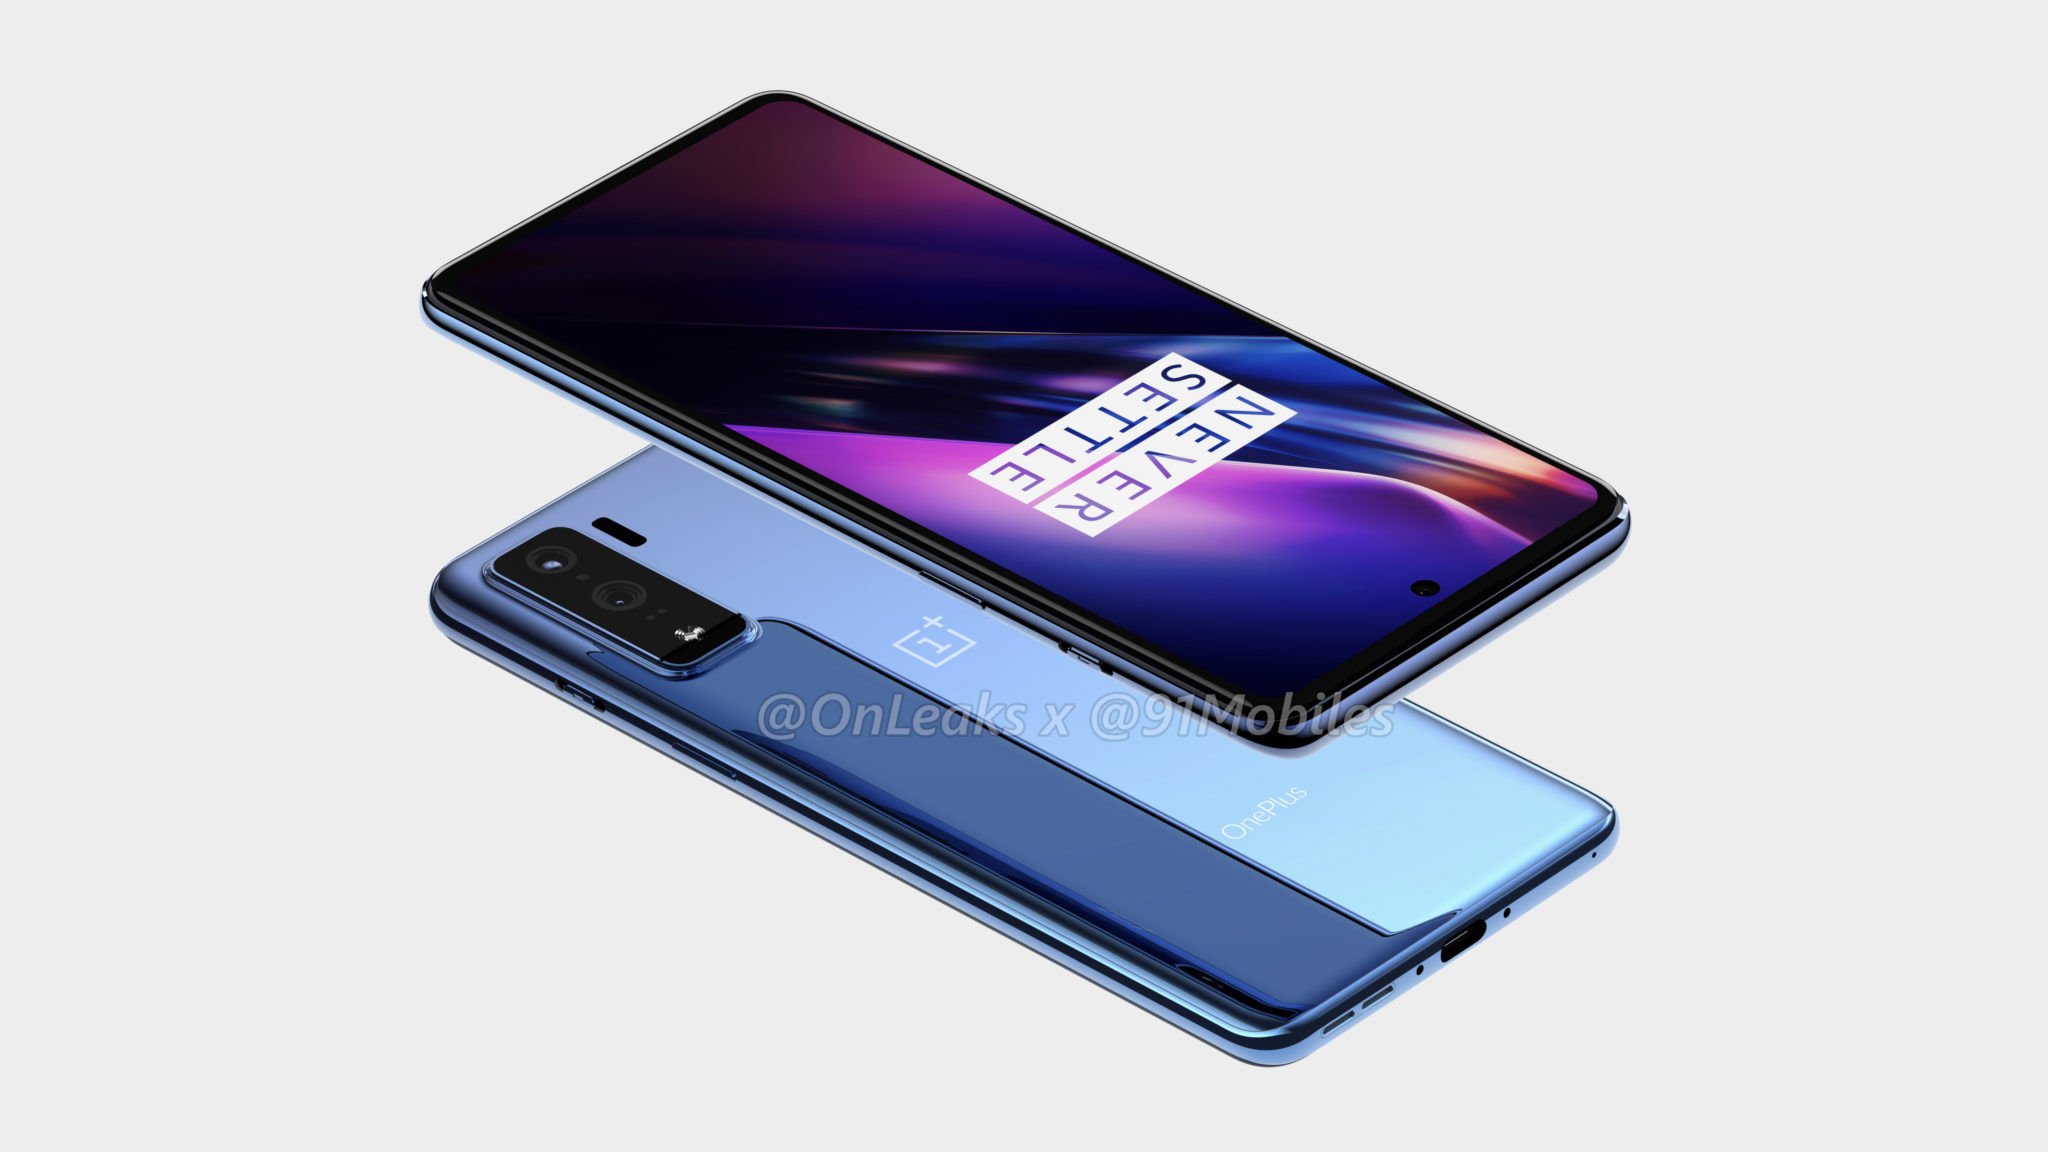 https://www.androidcentral.com/sites/androidcentral.com/files/styles/thumbnail/public/article_images/2019/12/oneplus-8-lite-render-4.jpg?itok=nSEWBX79